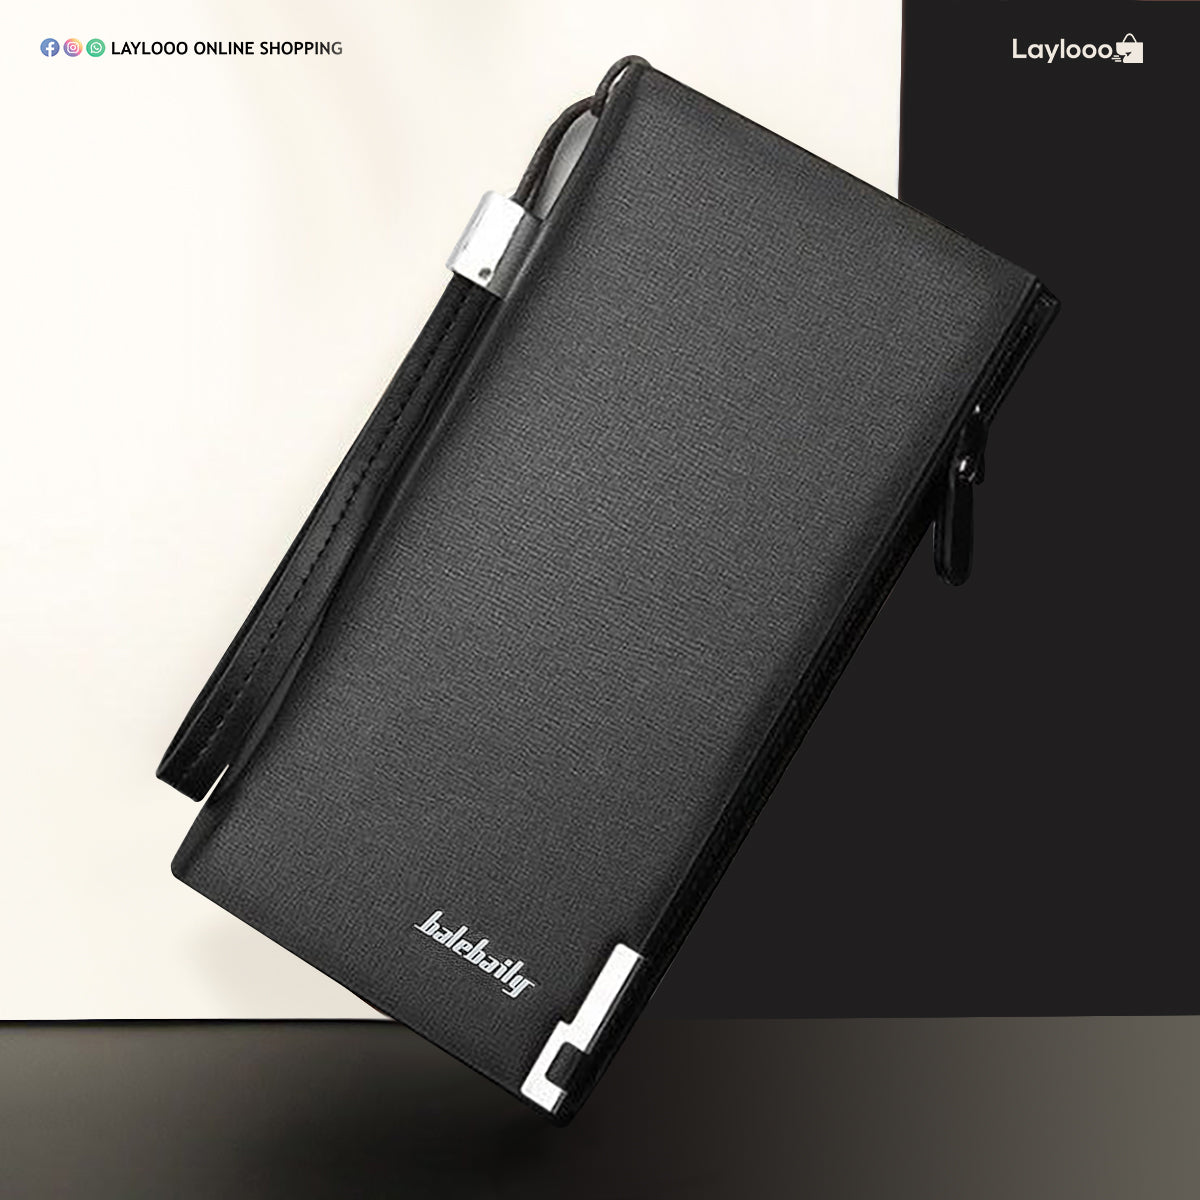 Bailbaily Leather Mobile and Business Wallet Black